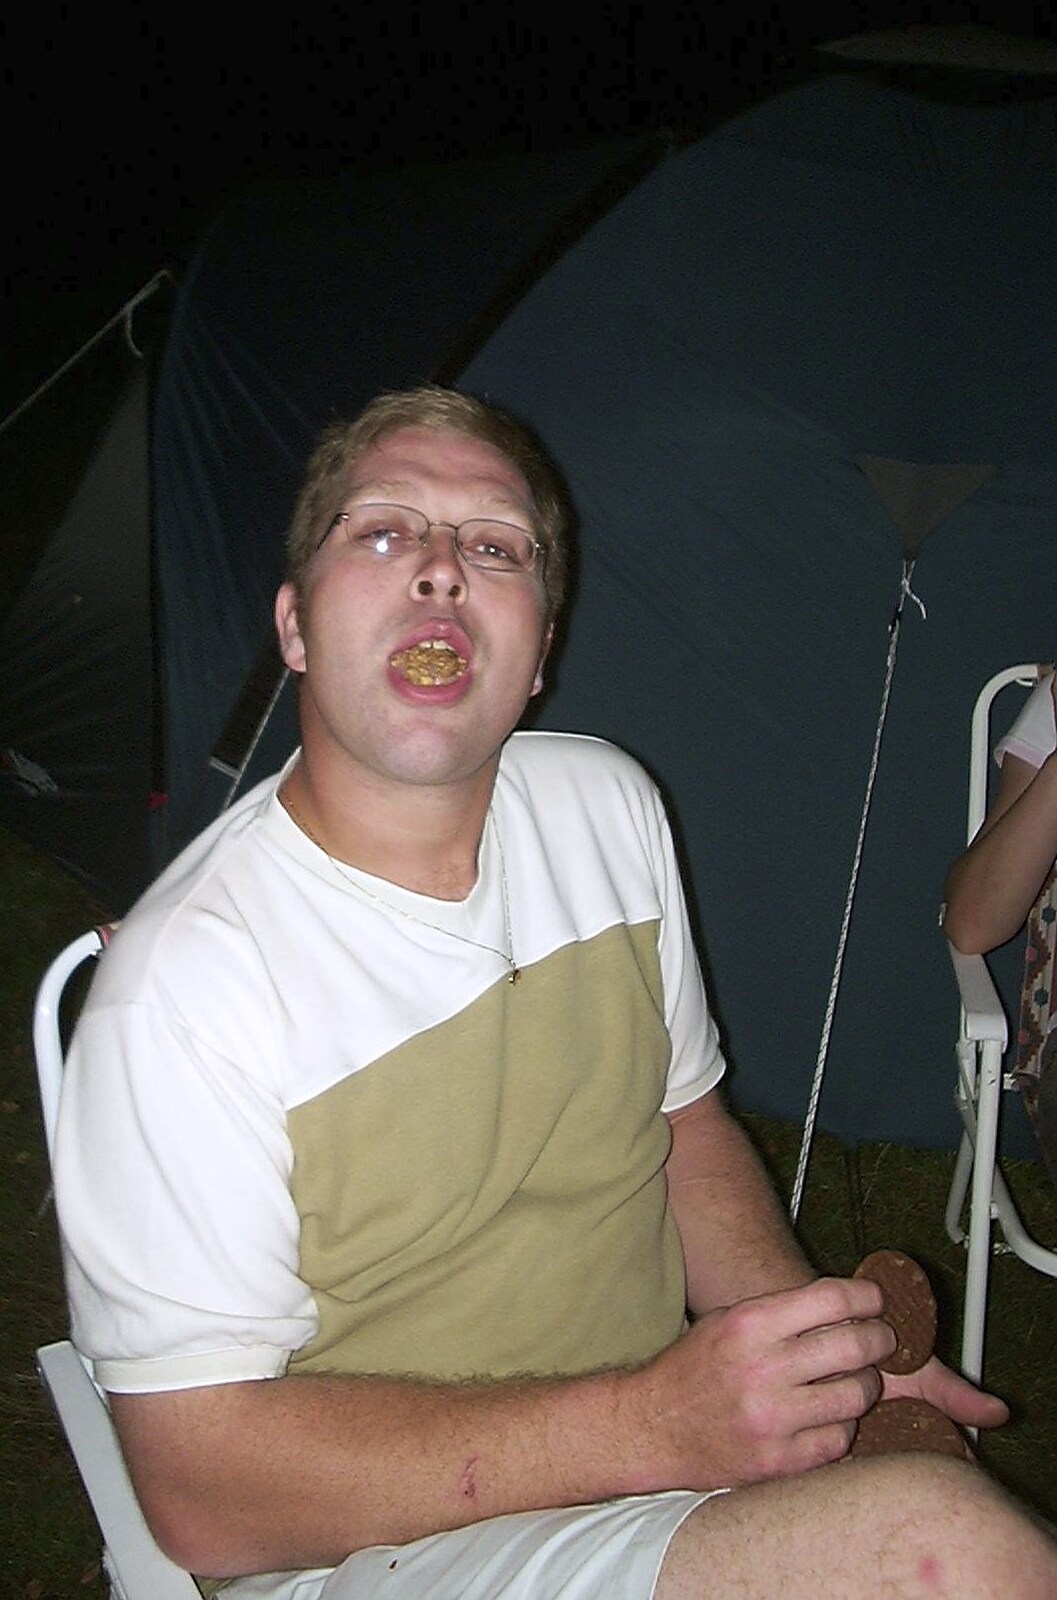 A BSCC Splinter Group Camping Trip, Shottisham, Suffolk - 13th August 2004: Marc shows of a partially-masticated biscuit